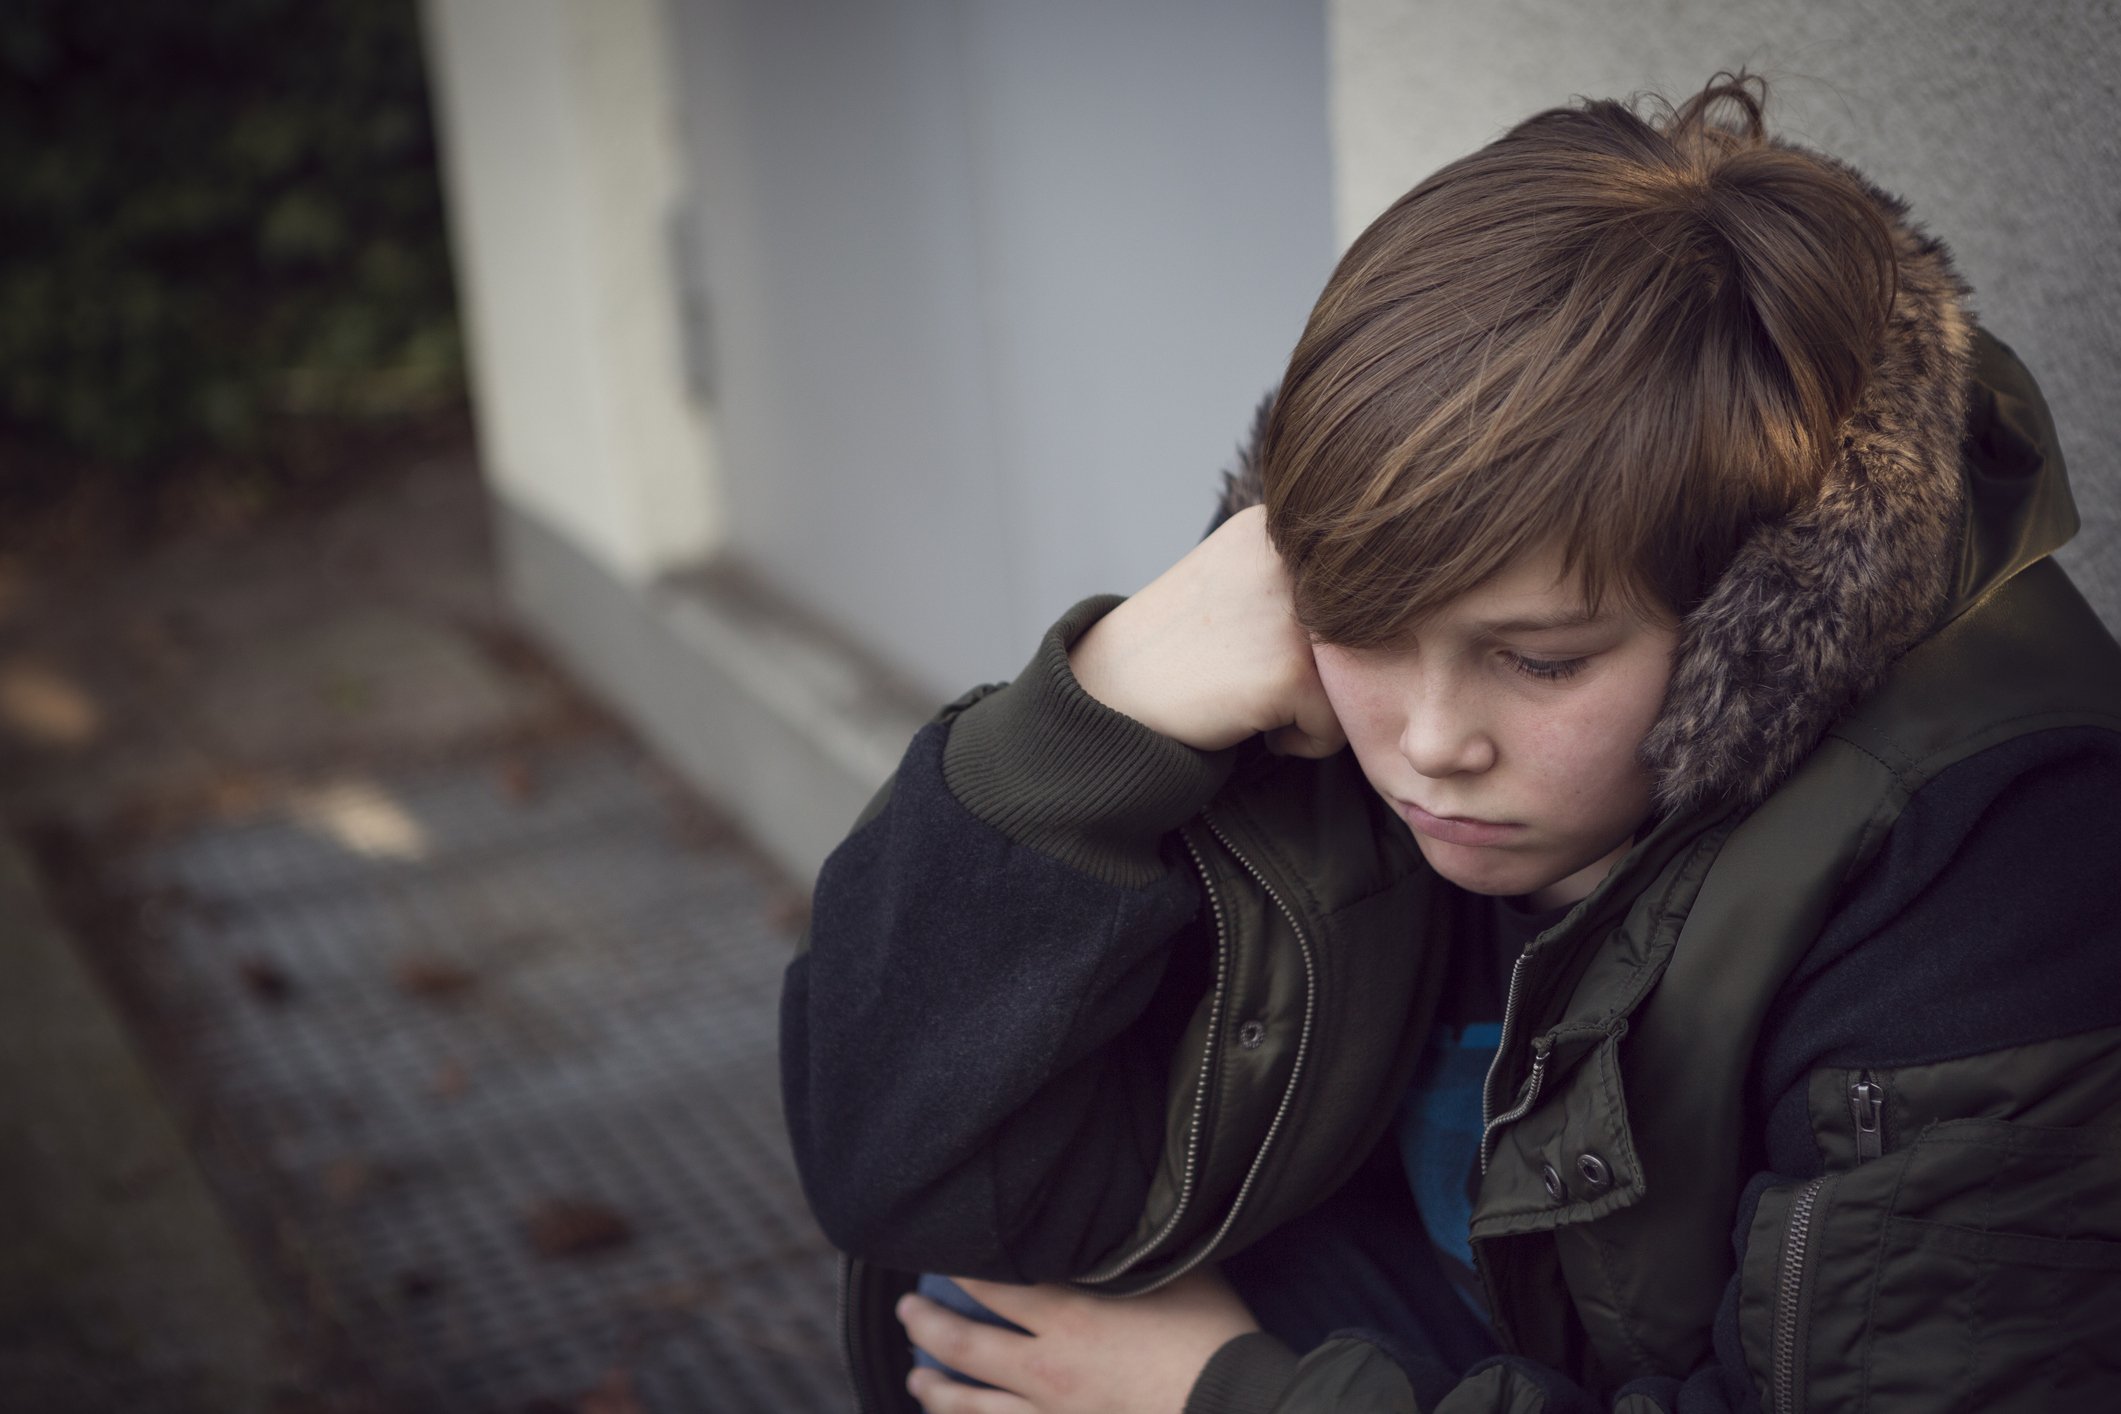 When Alex and Nick arrived at the abandoned building, they found the two boys crying because they were upset | Source: Pexels